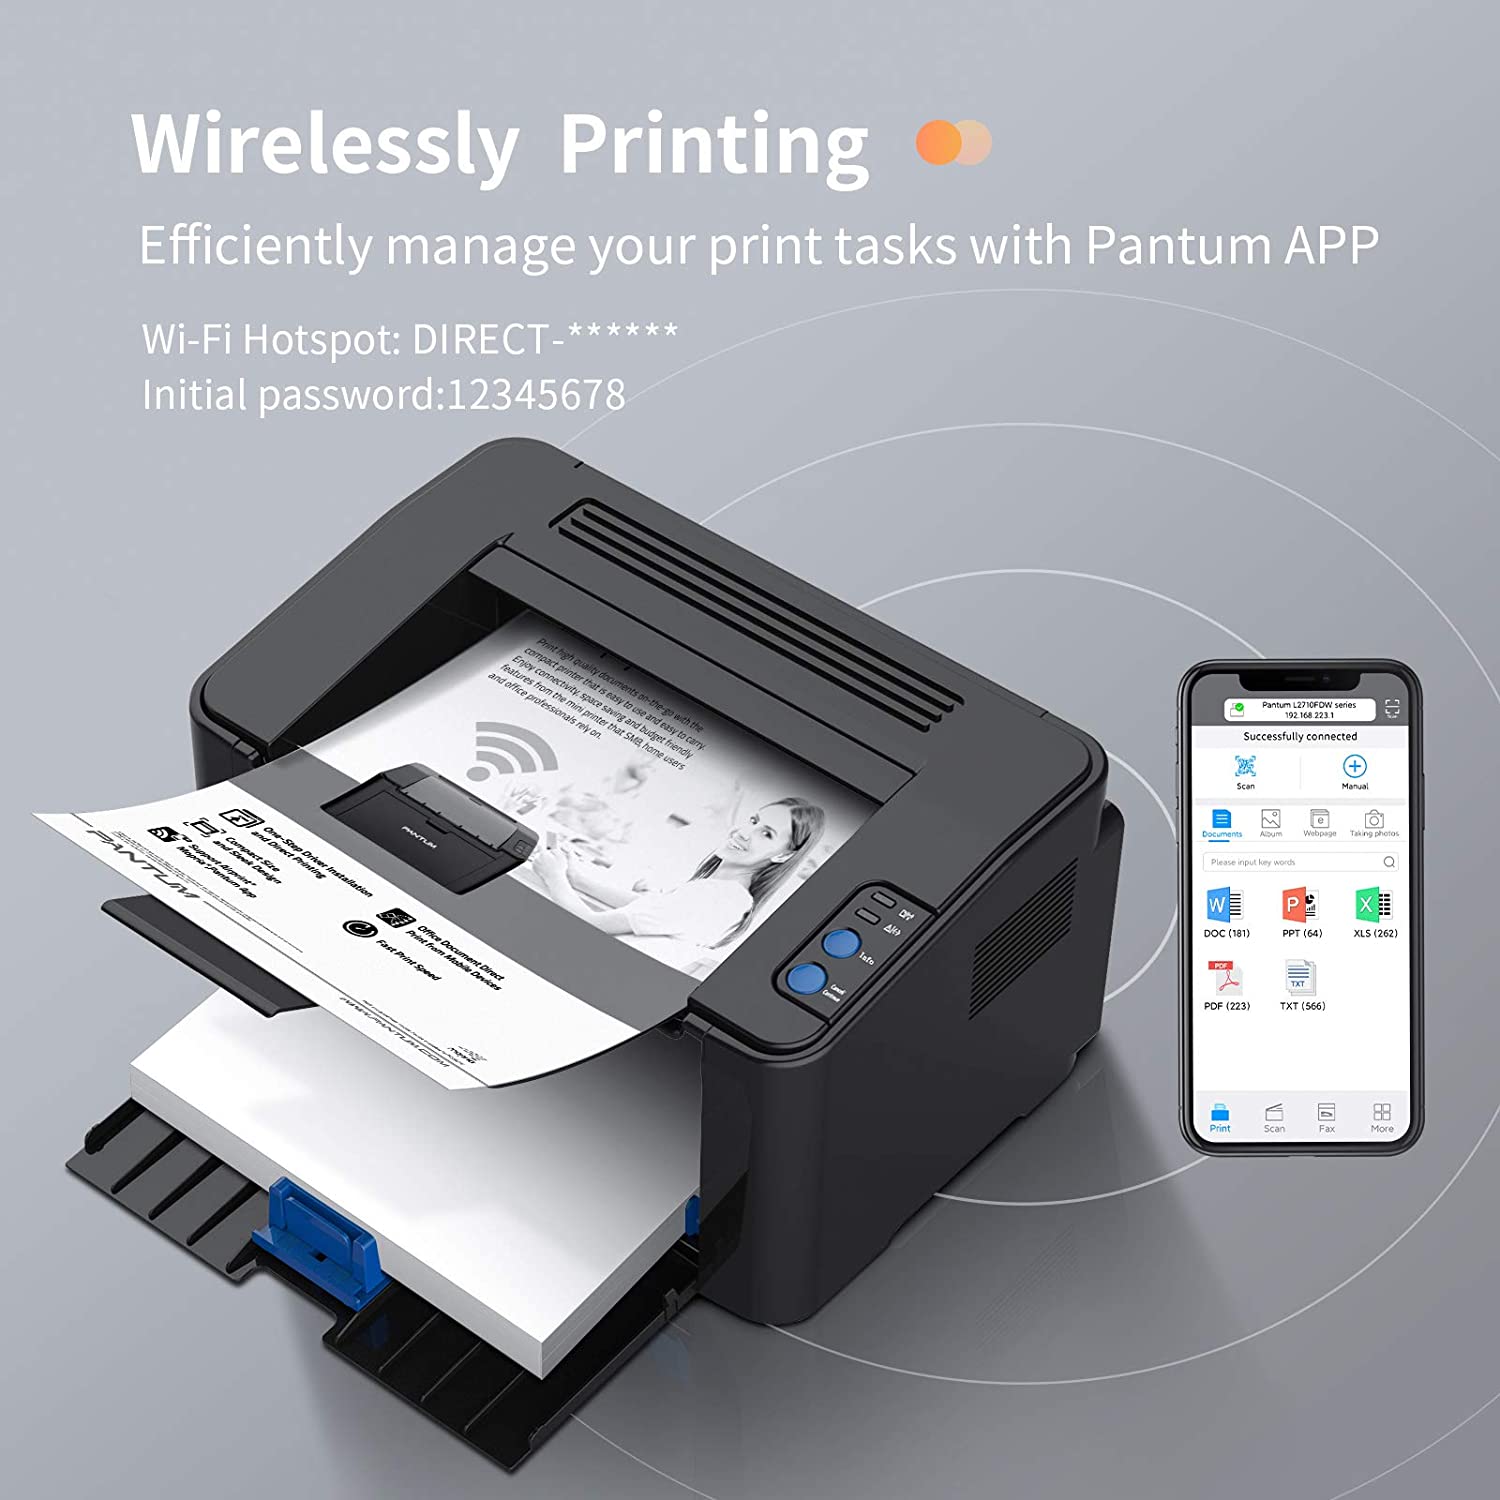 Pantum P2502W Wireless Laser Printer for Home Office Use, Black and White  Printer with Mobile Printing (V8V77B) – Super Image Office